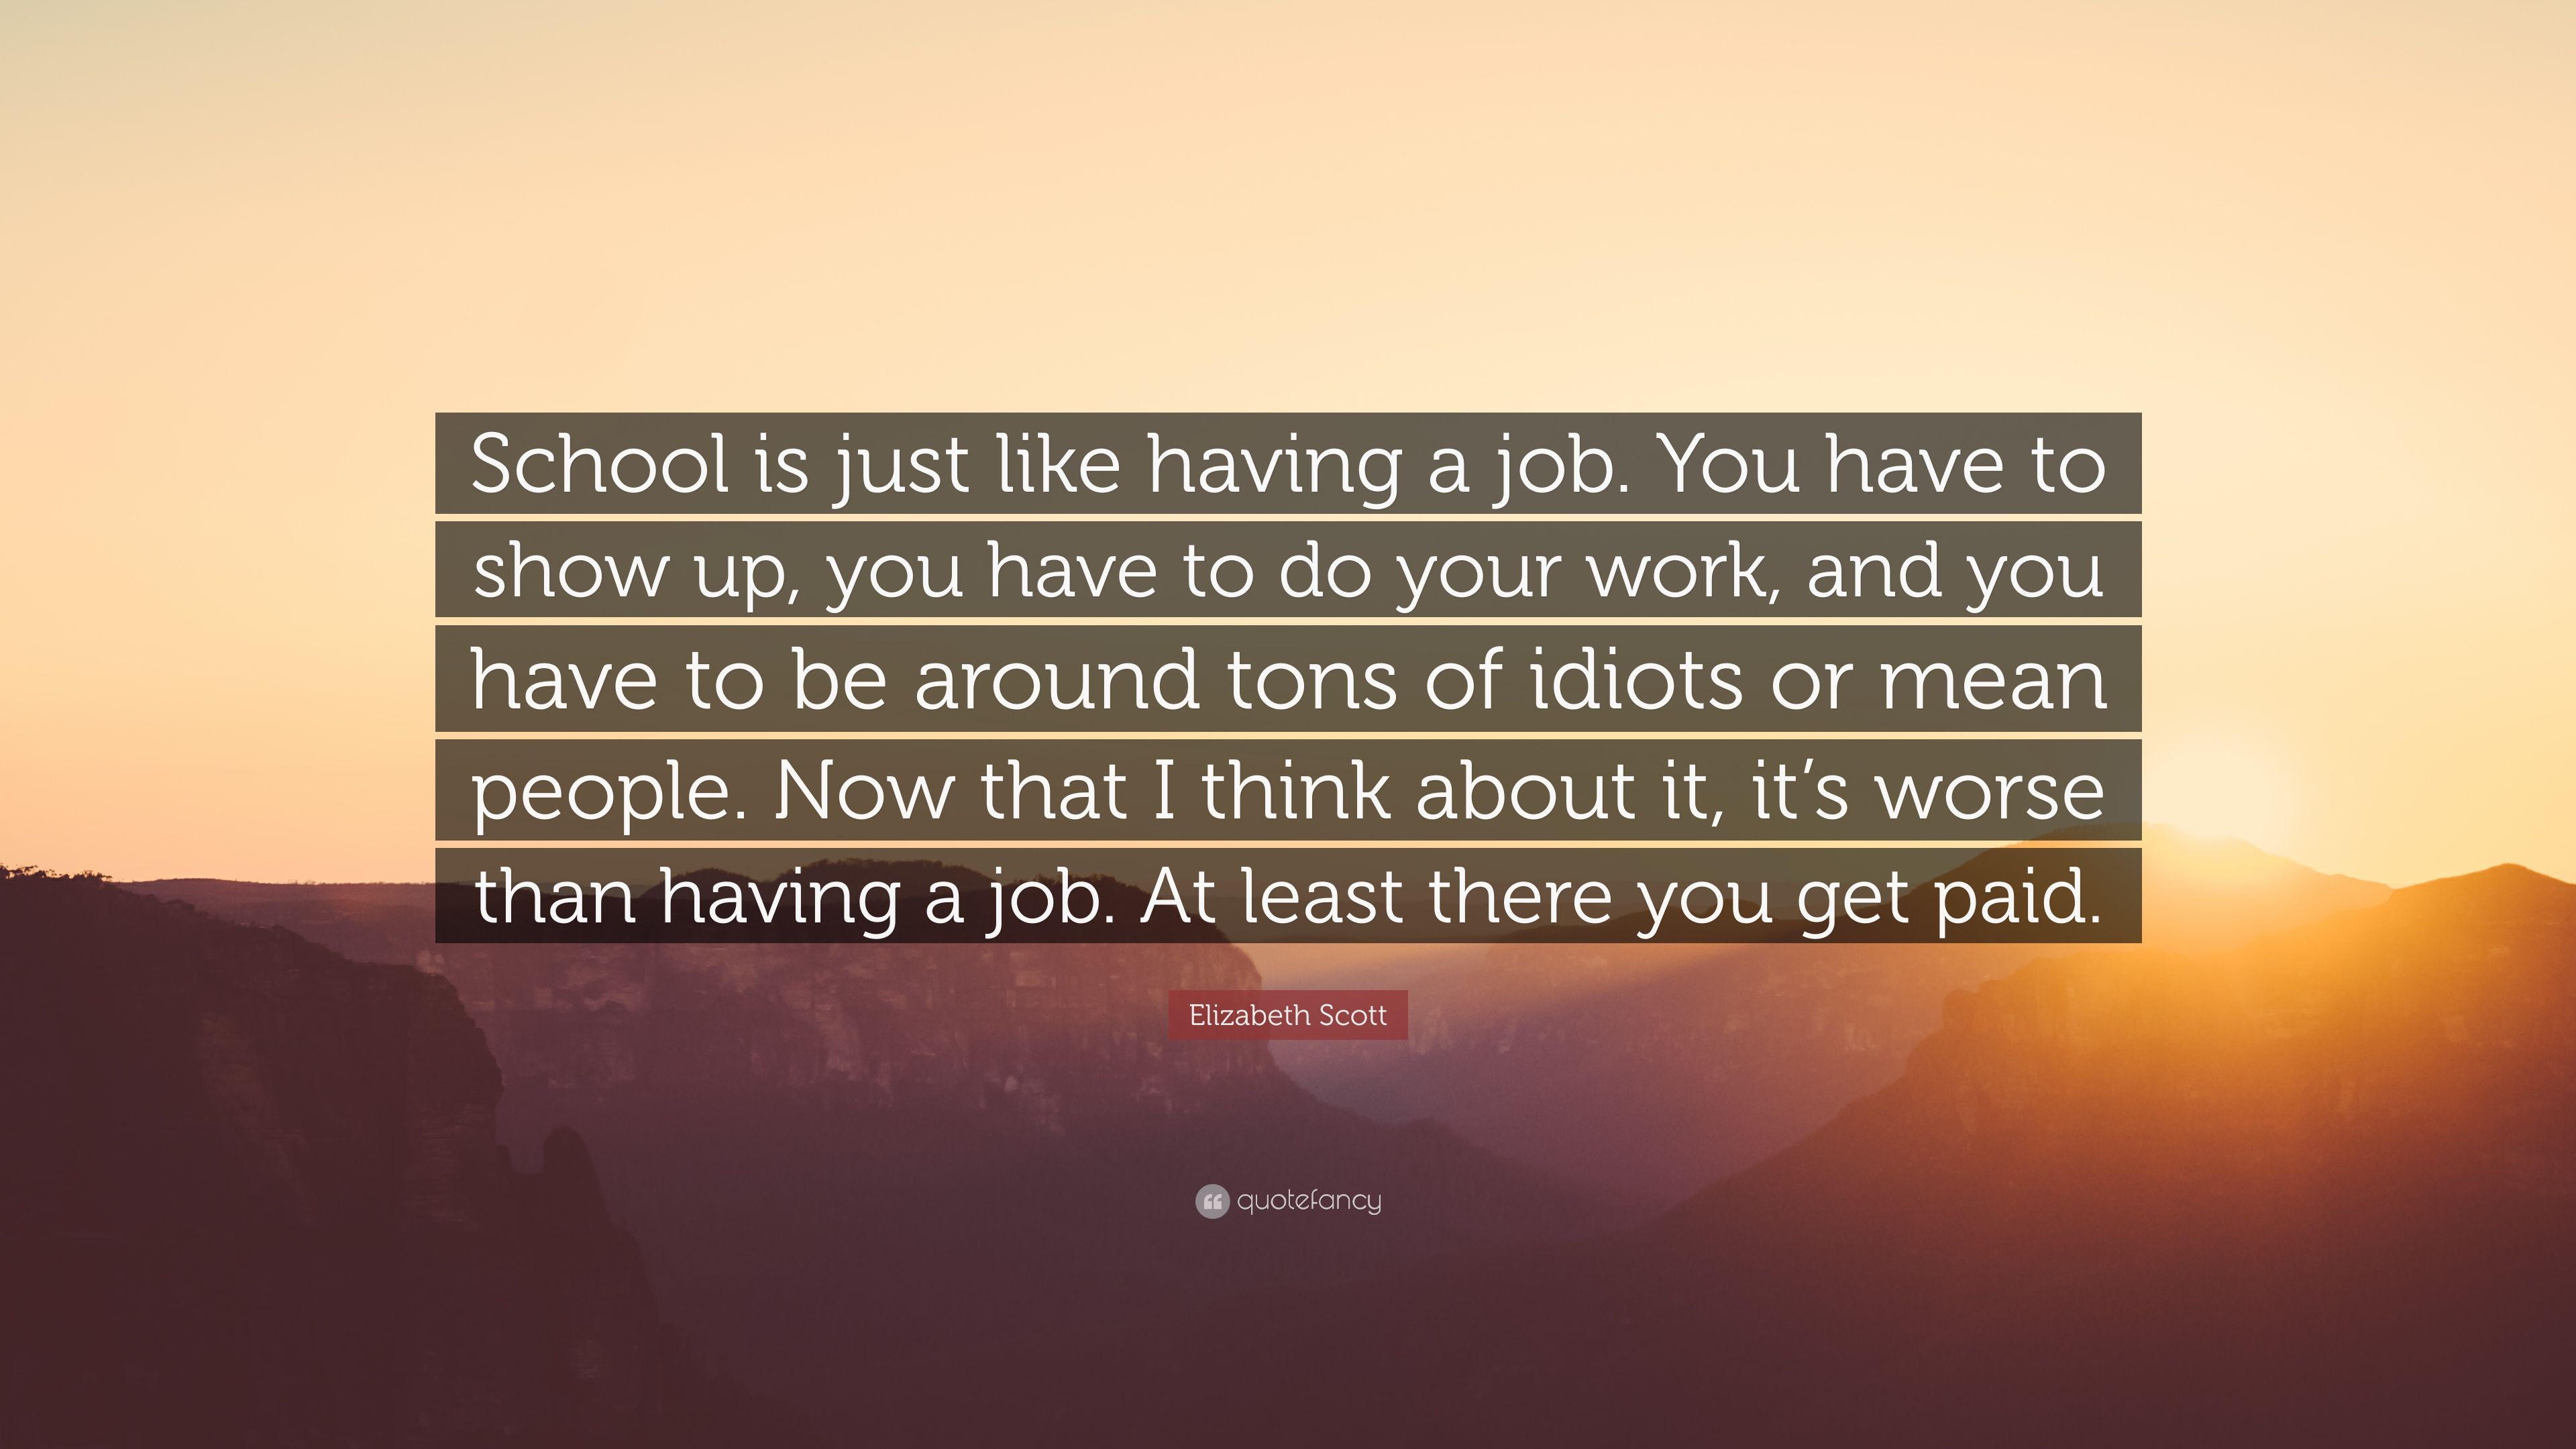 Elizabeth Scott Quote: “School is just like having a job. You have